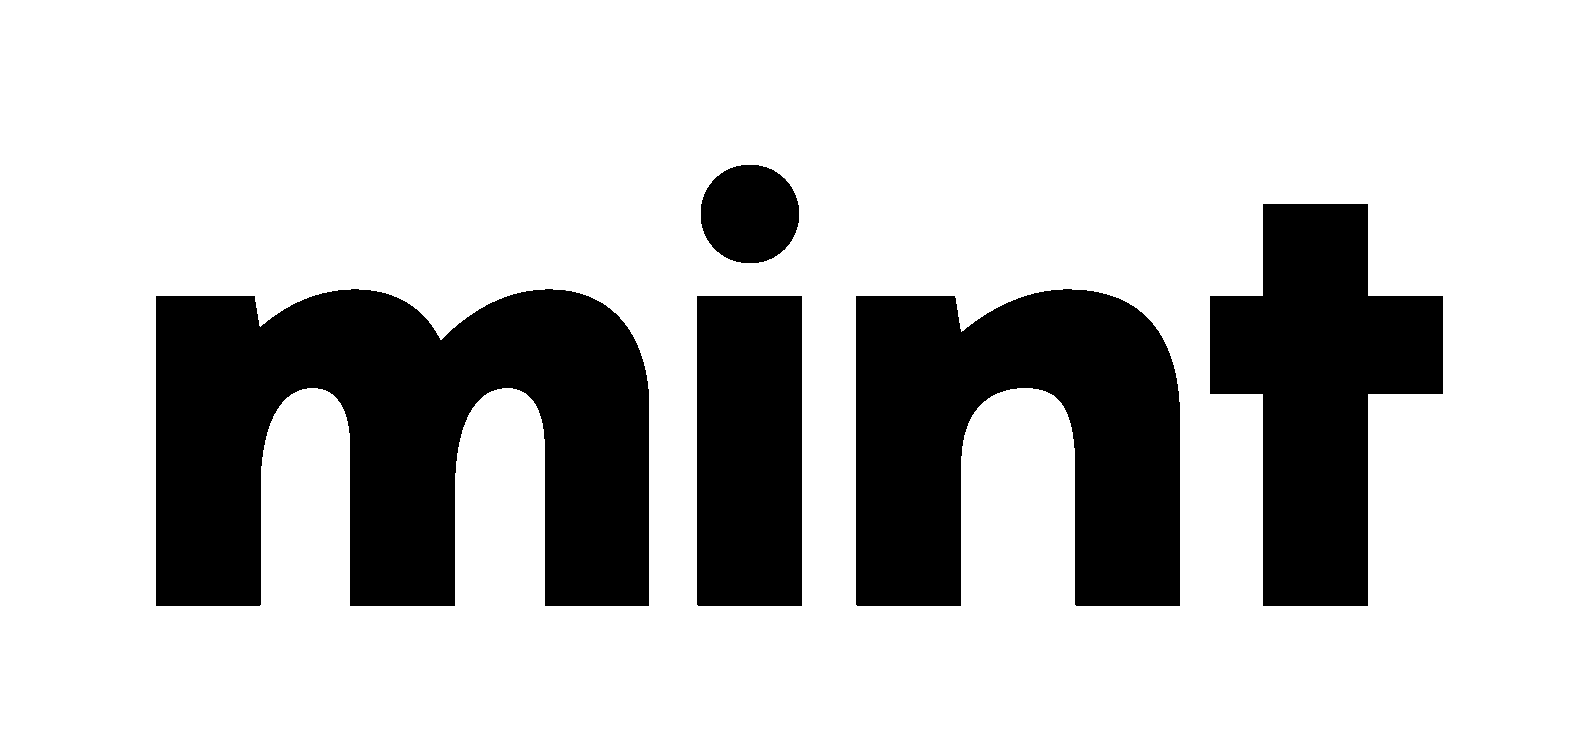 The Mint Agency